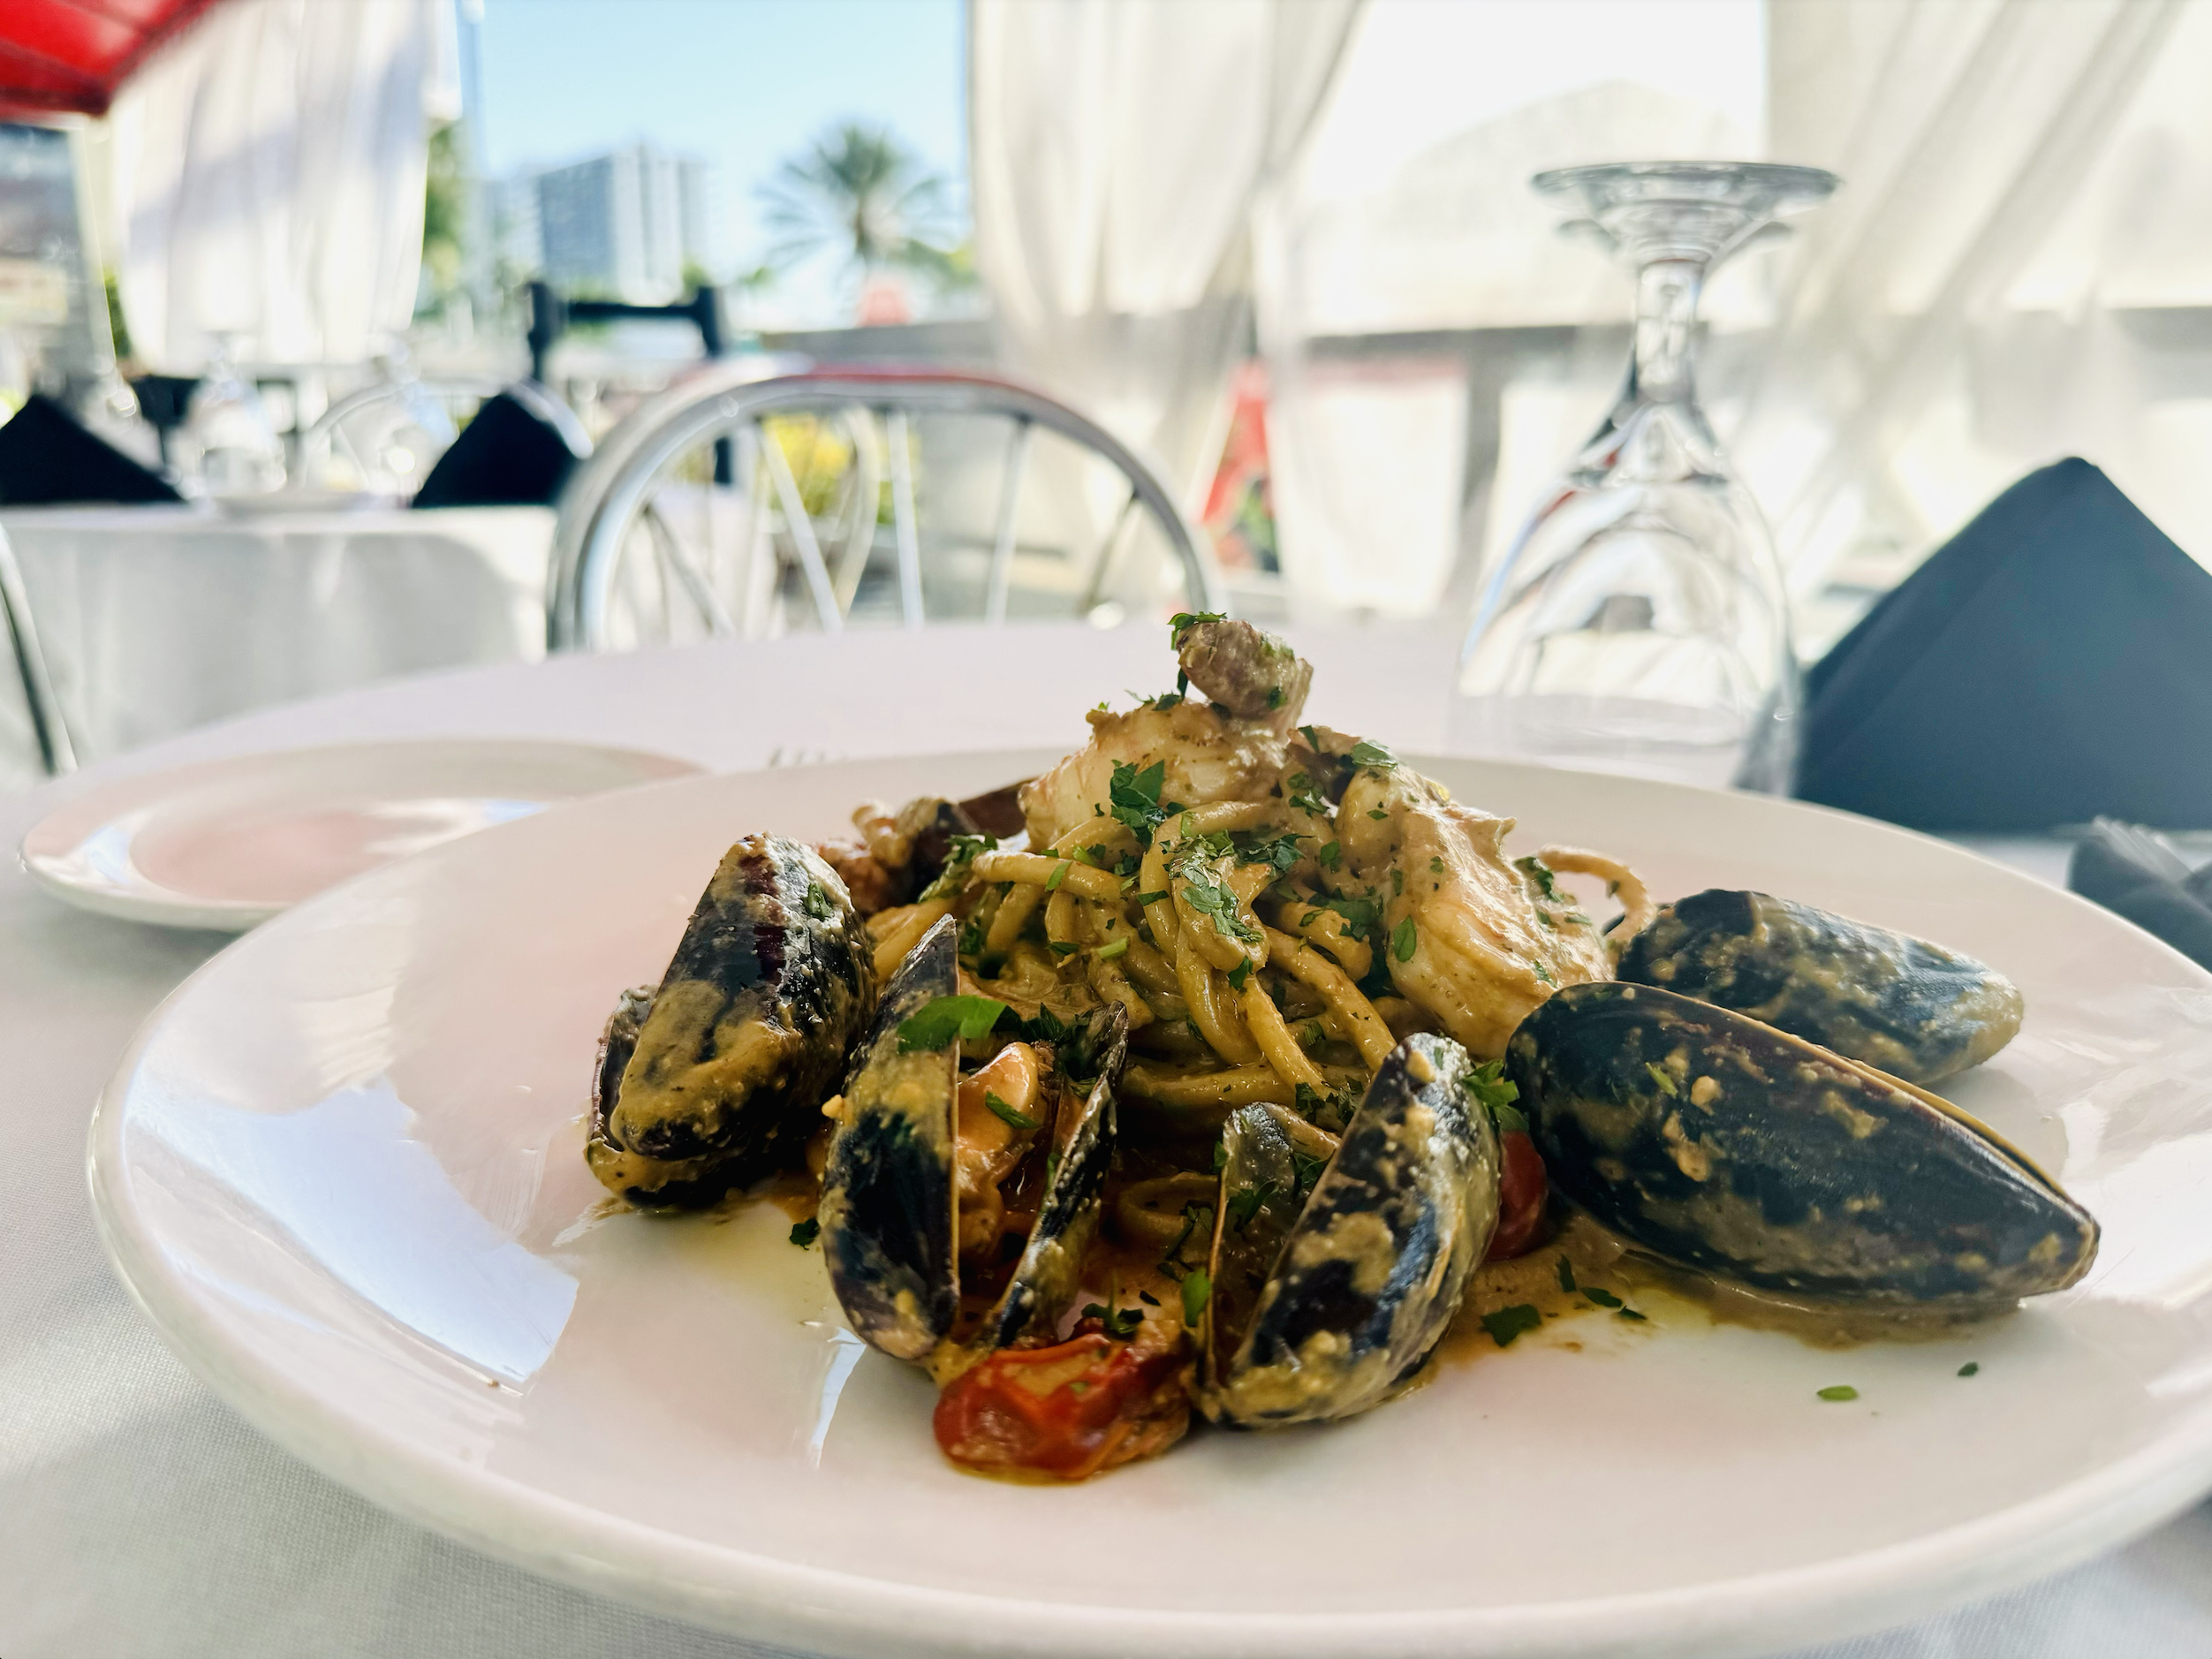 mussels & pecorino pasta from the Most recommended Seafood restaurant in ft lauderdale